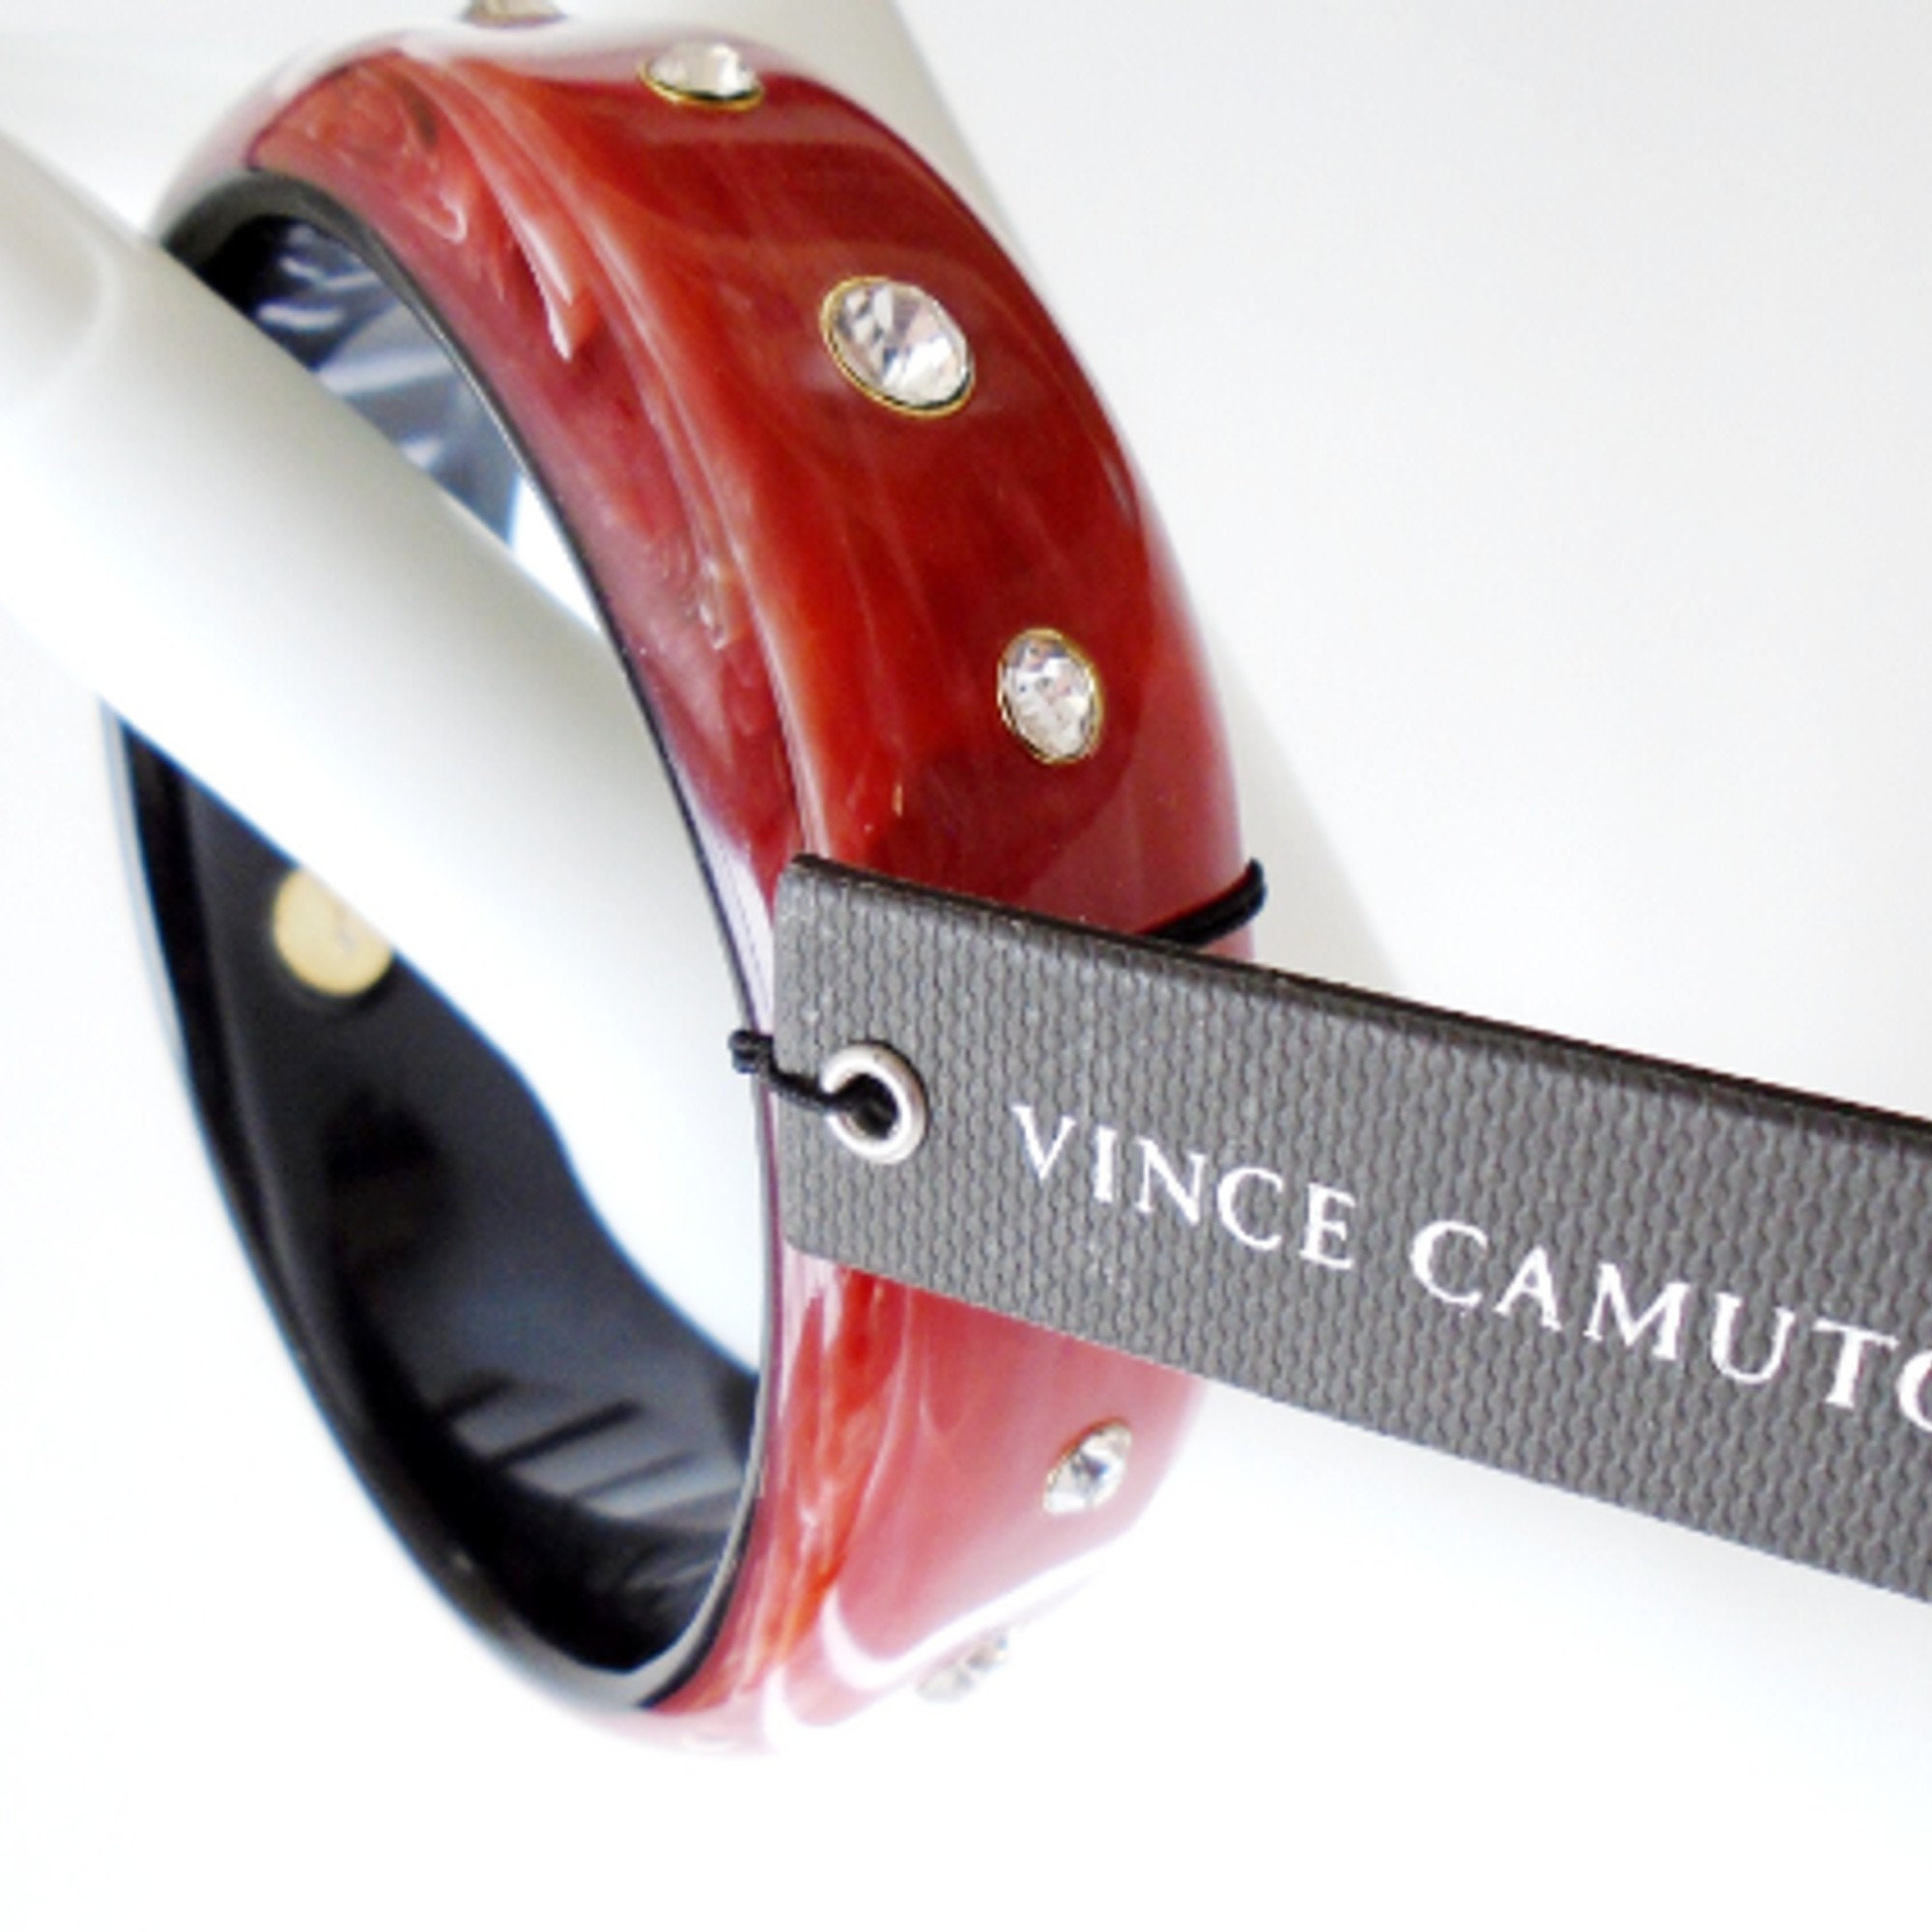 VINCE CAMUTO Red Lucite Crystal Bangle, Red Resin Crystal Bangle Bracelet,  Vintage Vince Camuto Jewelry 